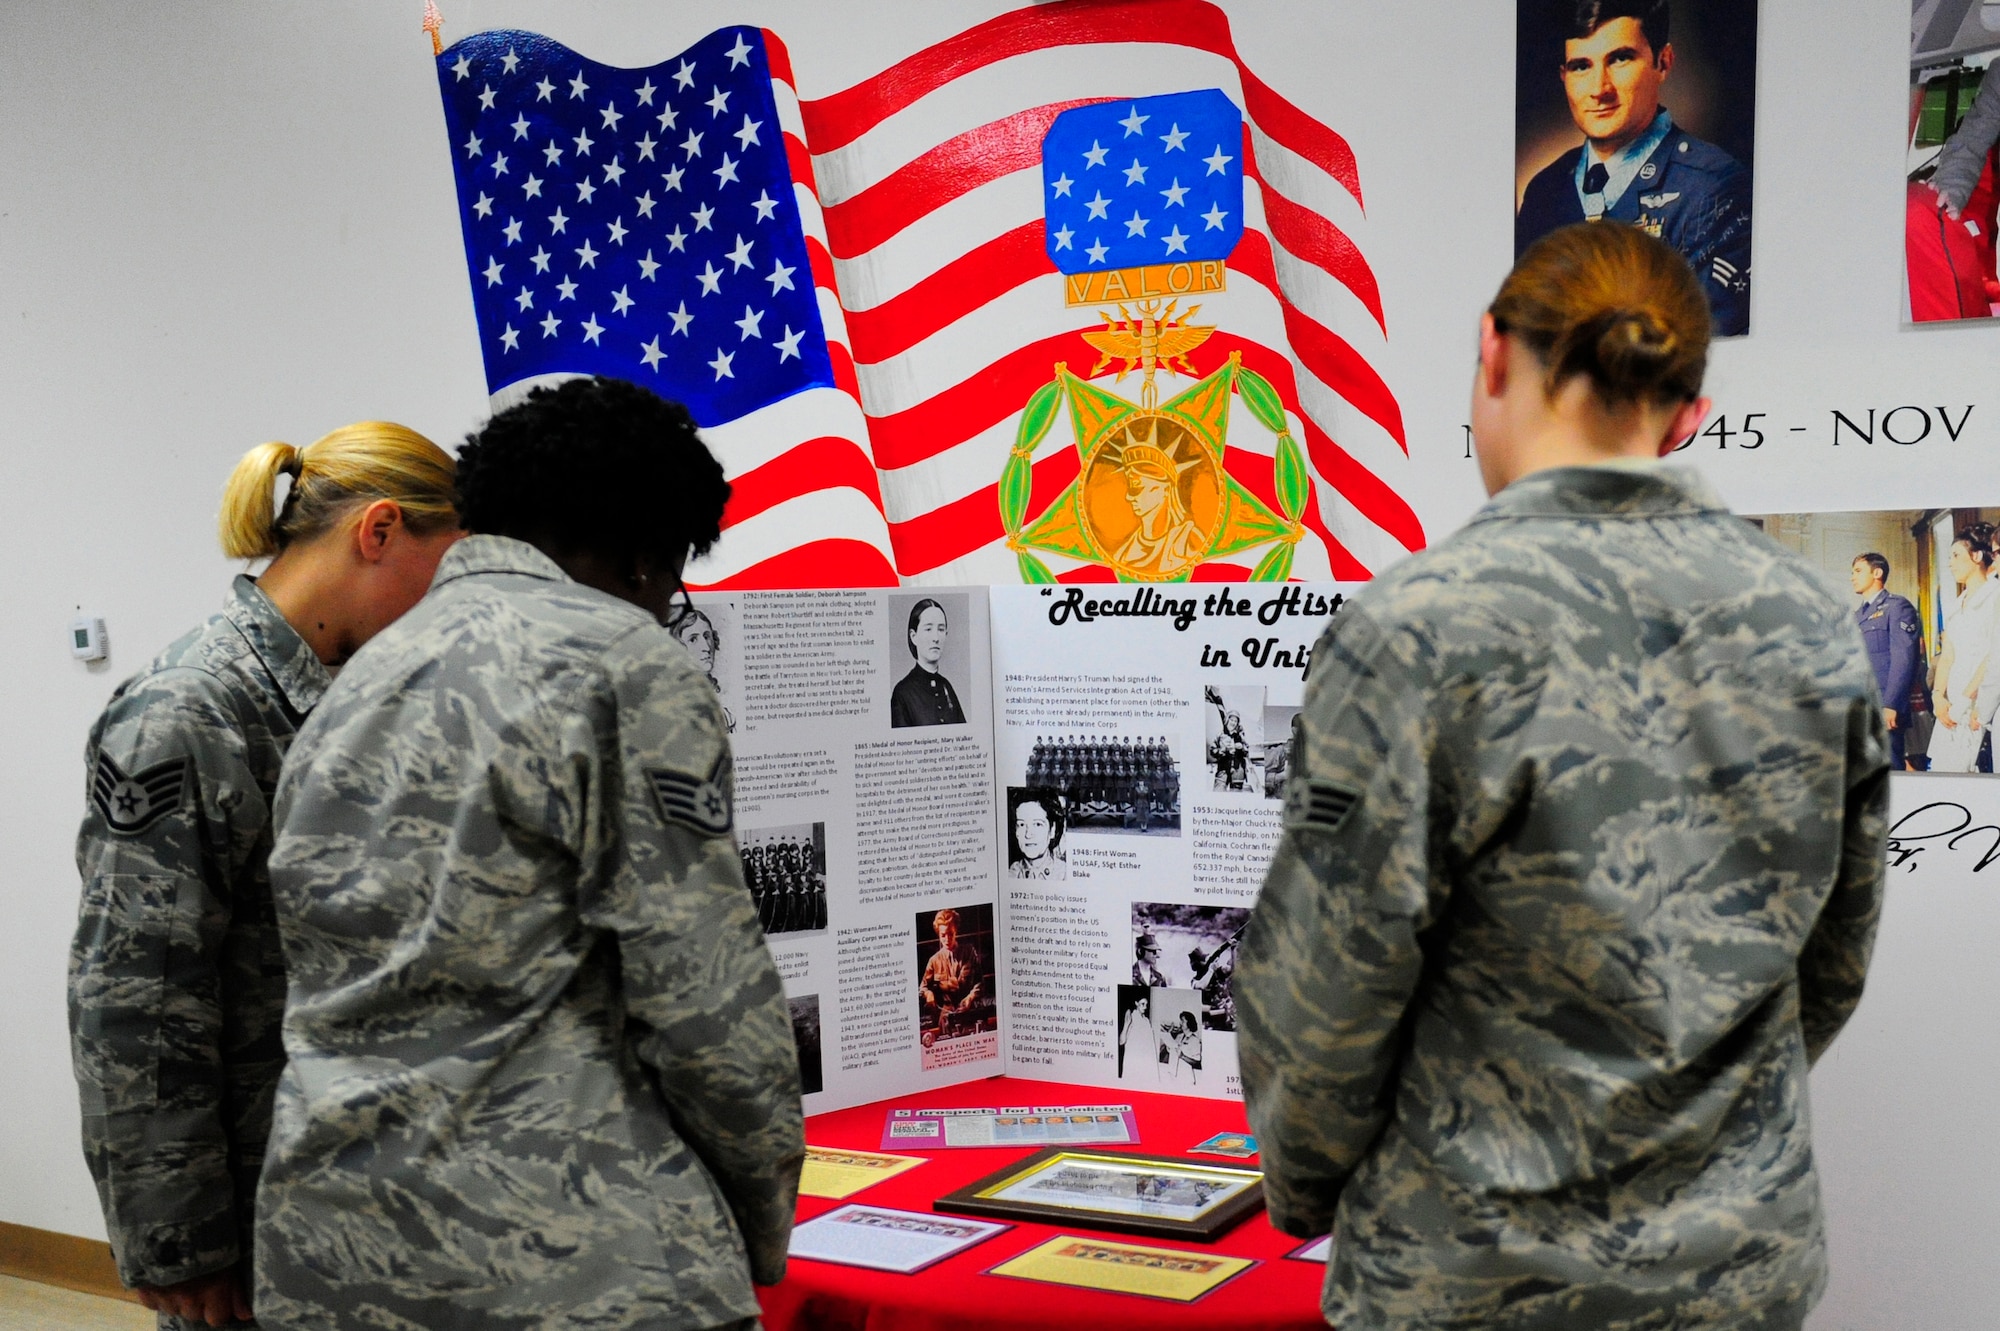 Posters of females in the U.S. military were placed throughout the room during the 380 Air Expeditionary Wing Women's History Month symposium luncheon. The theme, "Recalling Women in Uniform" highlighted the contributions of female Airmen and Soldiers both past and present. (U.S. Air Force Photo by Capt. Jennifer Pearson) (Released)